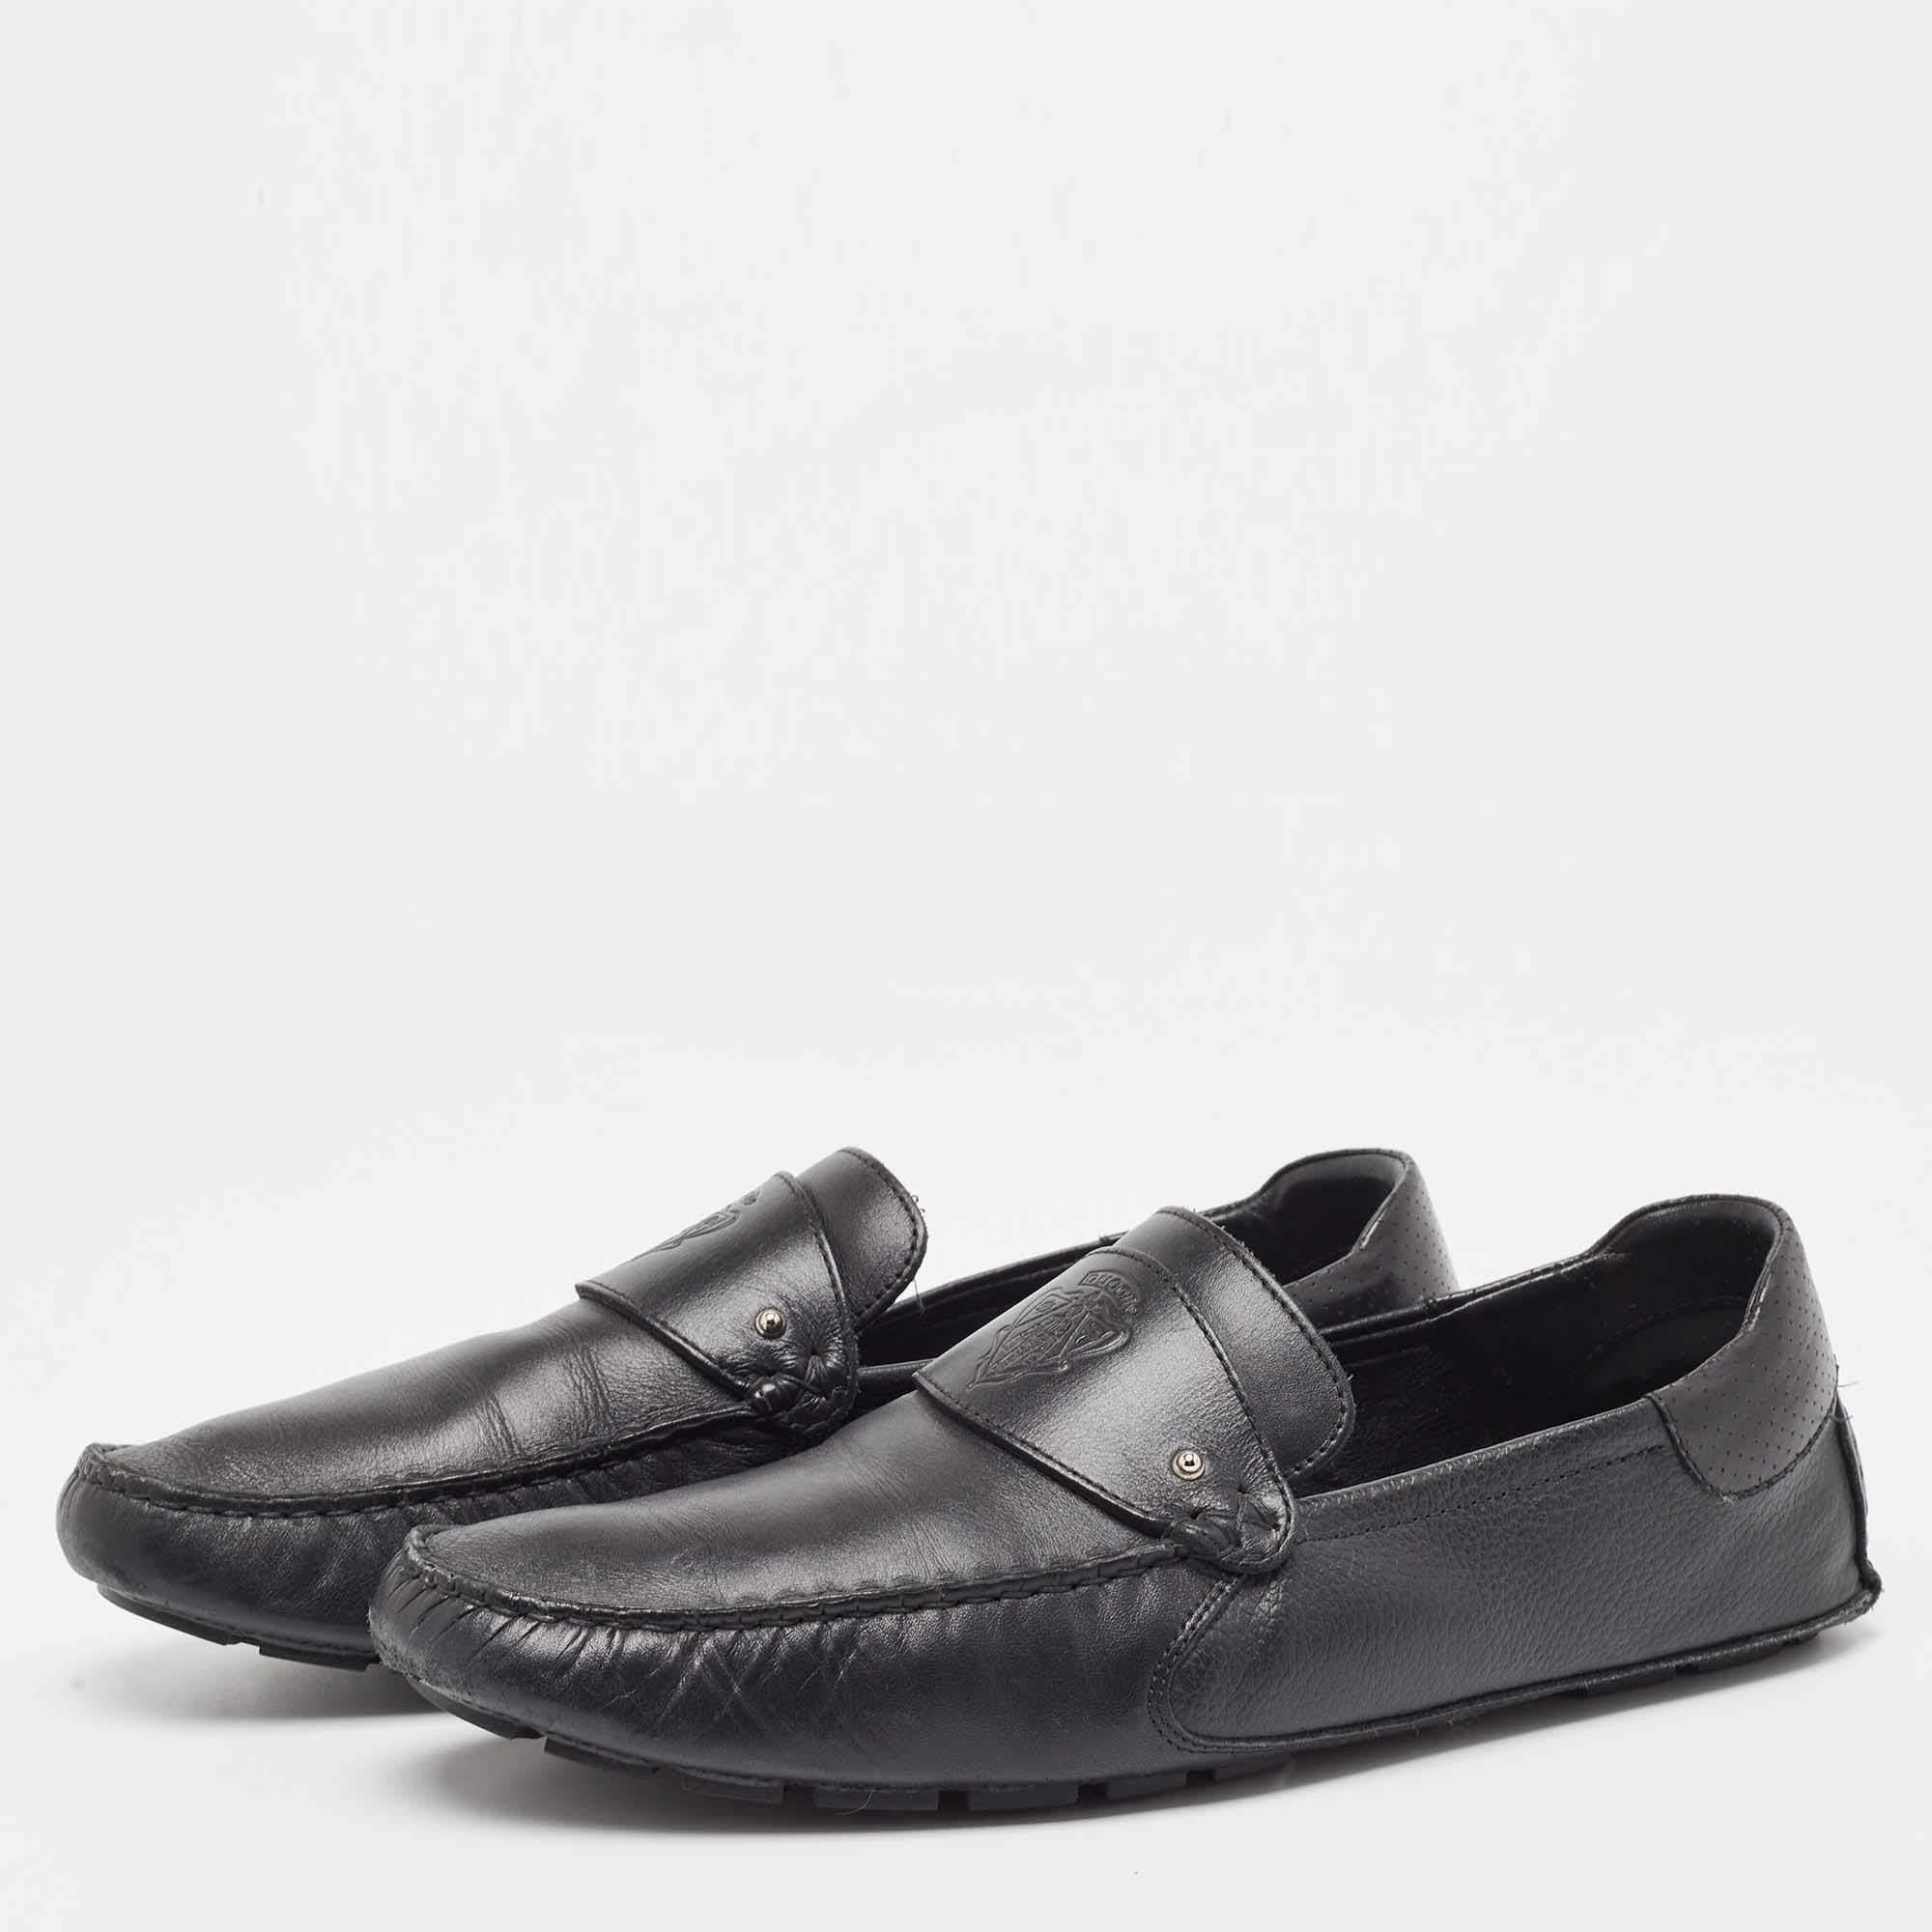 Gucci Black Leather Slip On Loafers Size 44.5 For Sale 4